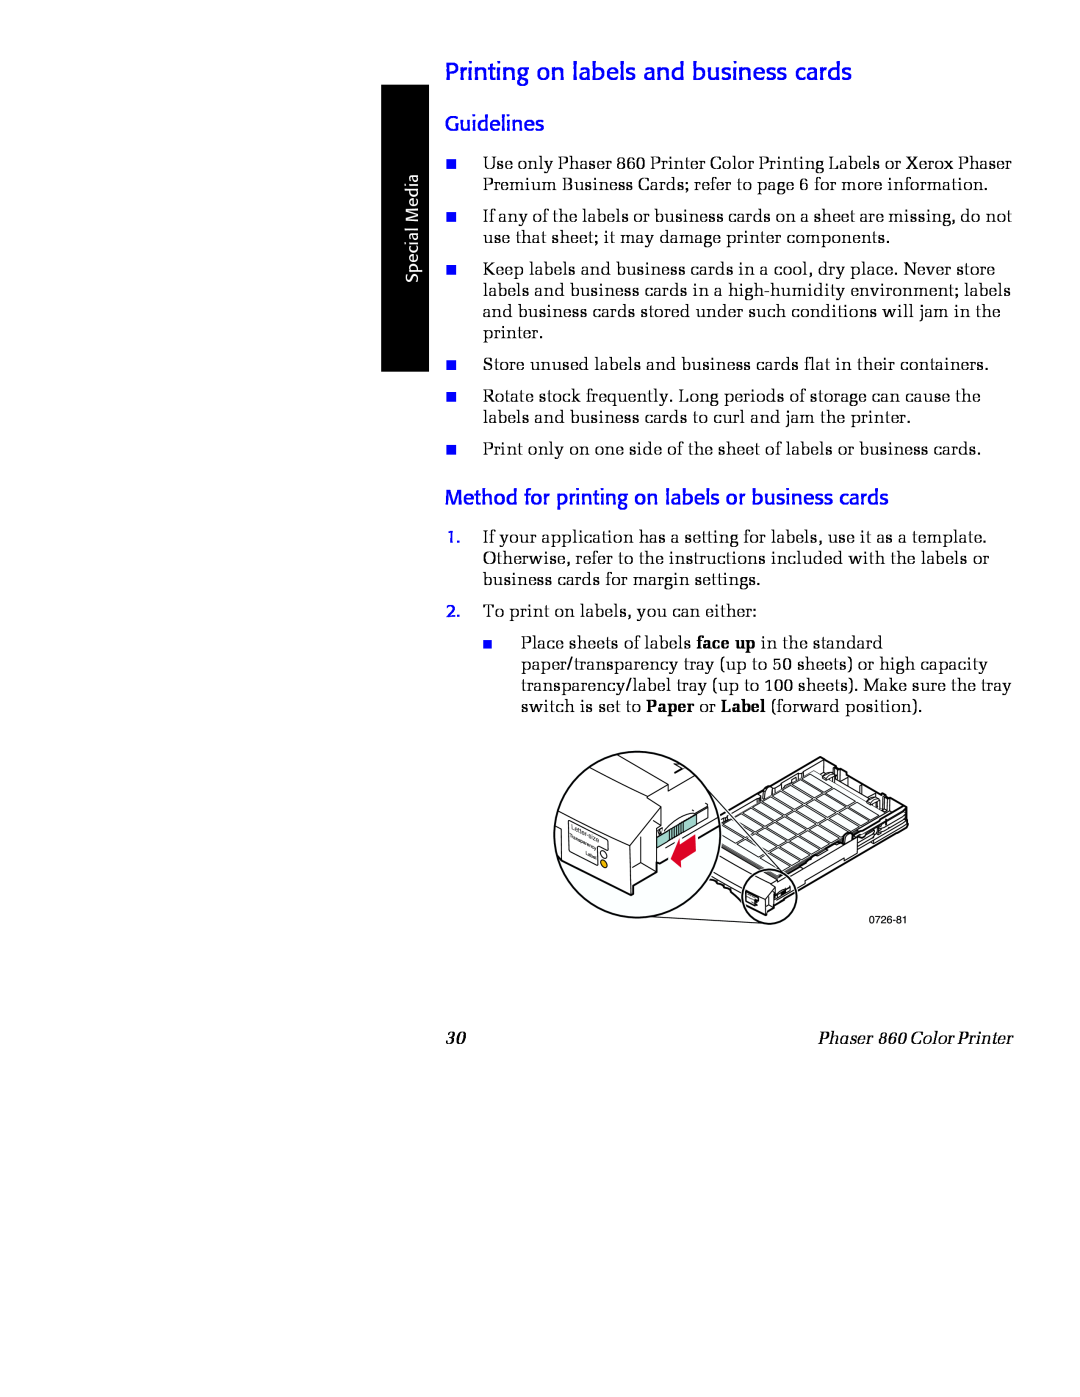 Xerox Phaser 860 manual Printing on labels and business cards, Label, Transpa rency, 0726-81, Special Media 